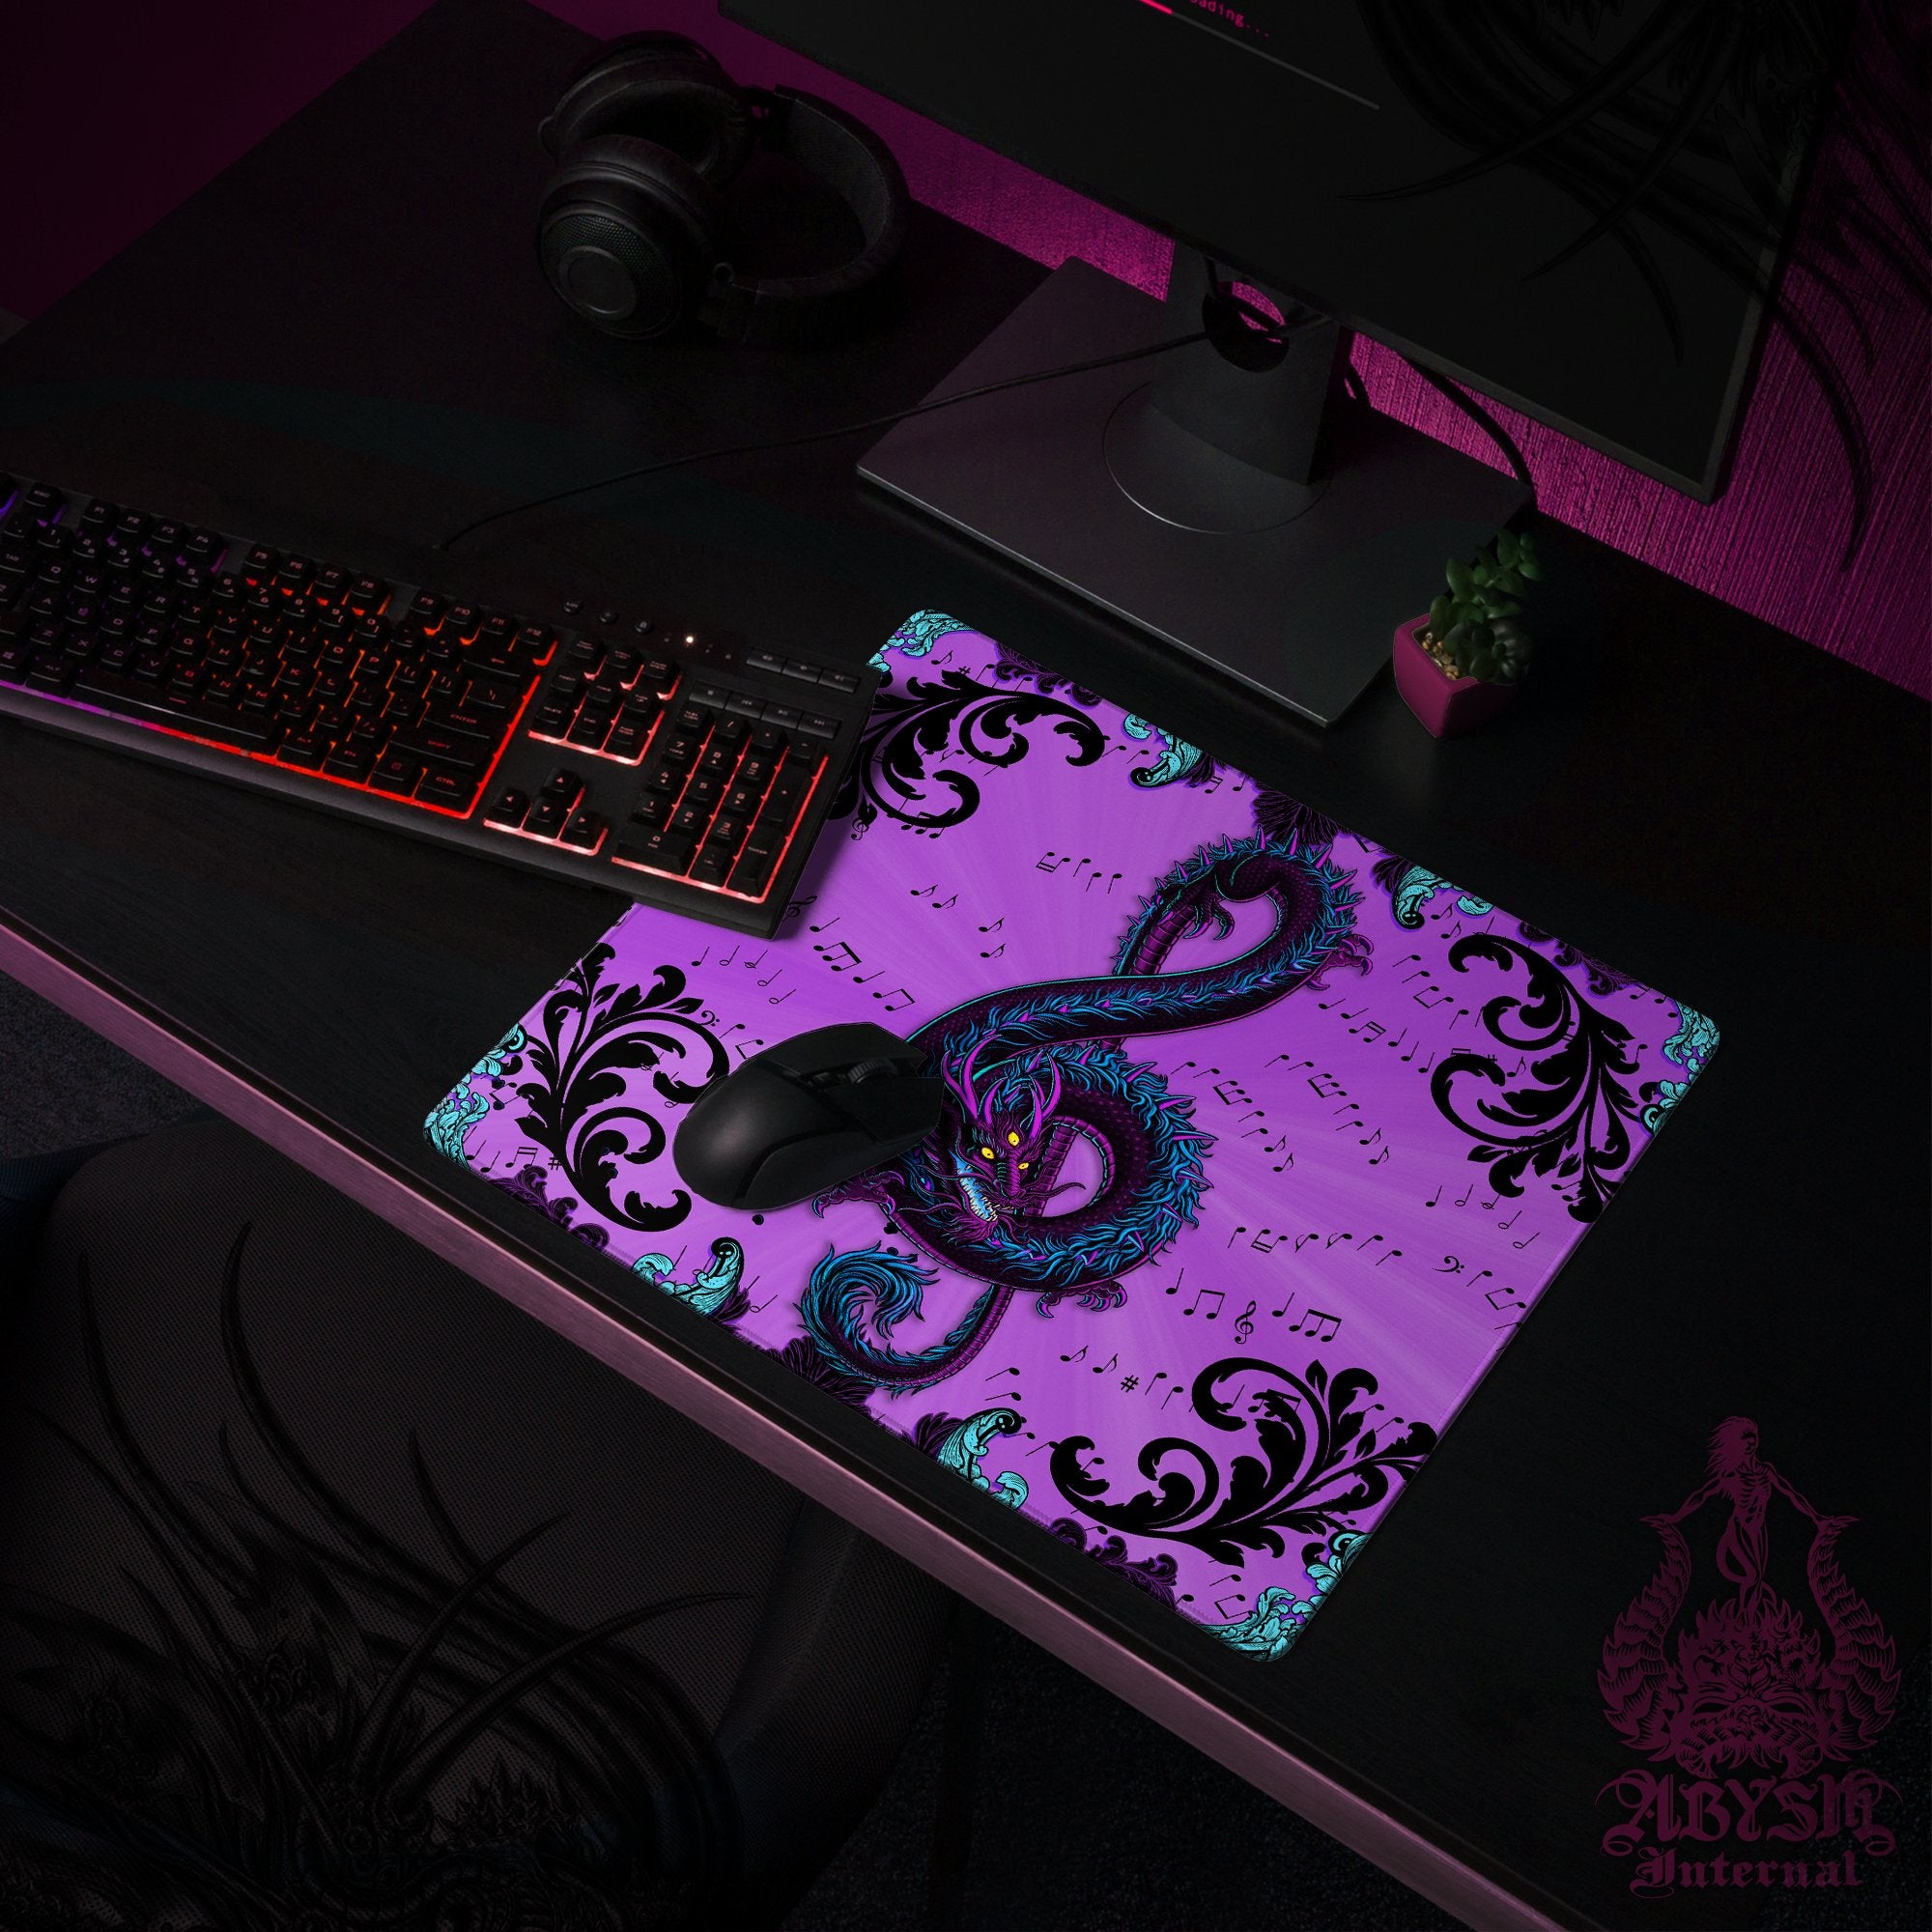 Dragon Gaming Desk Mat, Music Mouse Pad, Pastel Goth Table Protector Cover, Asian Workpad, Treble Clef Art Print - Black Purple - 2 Options - Abysm Internal